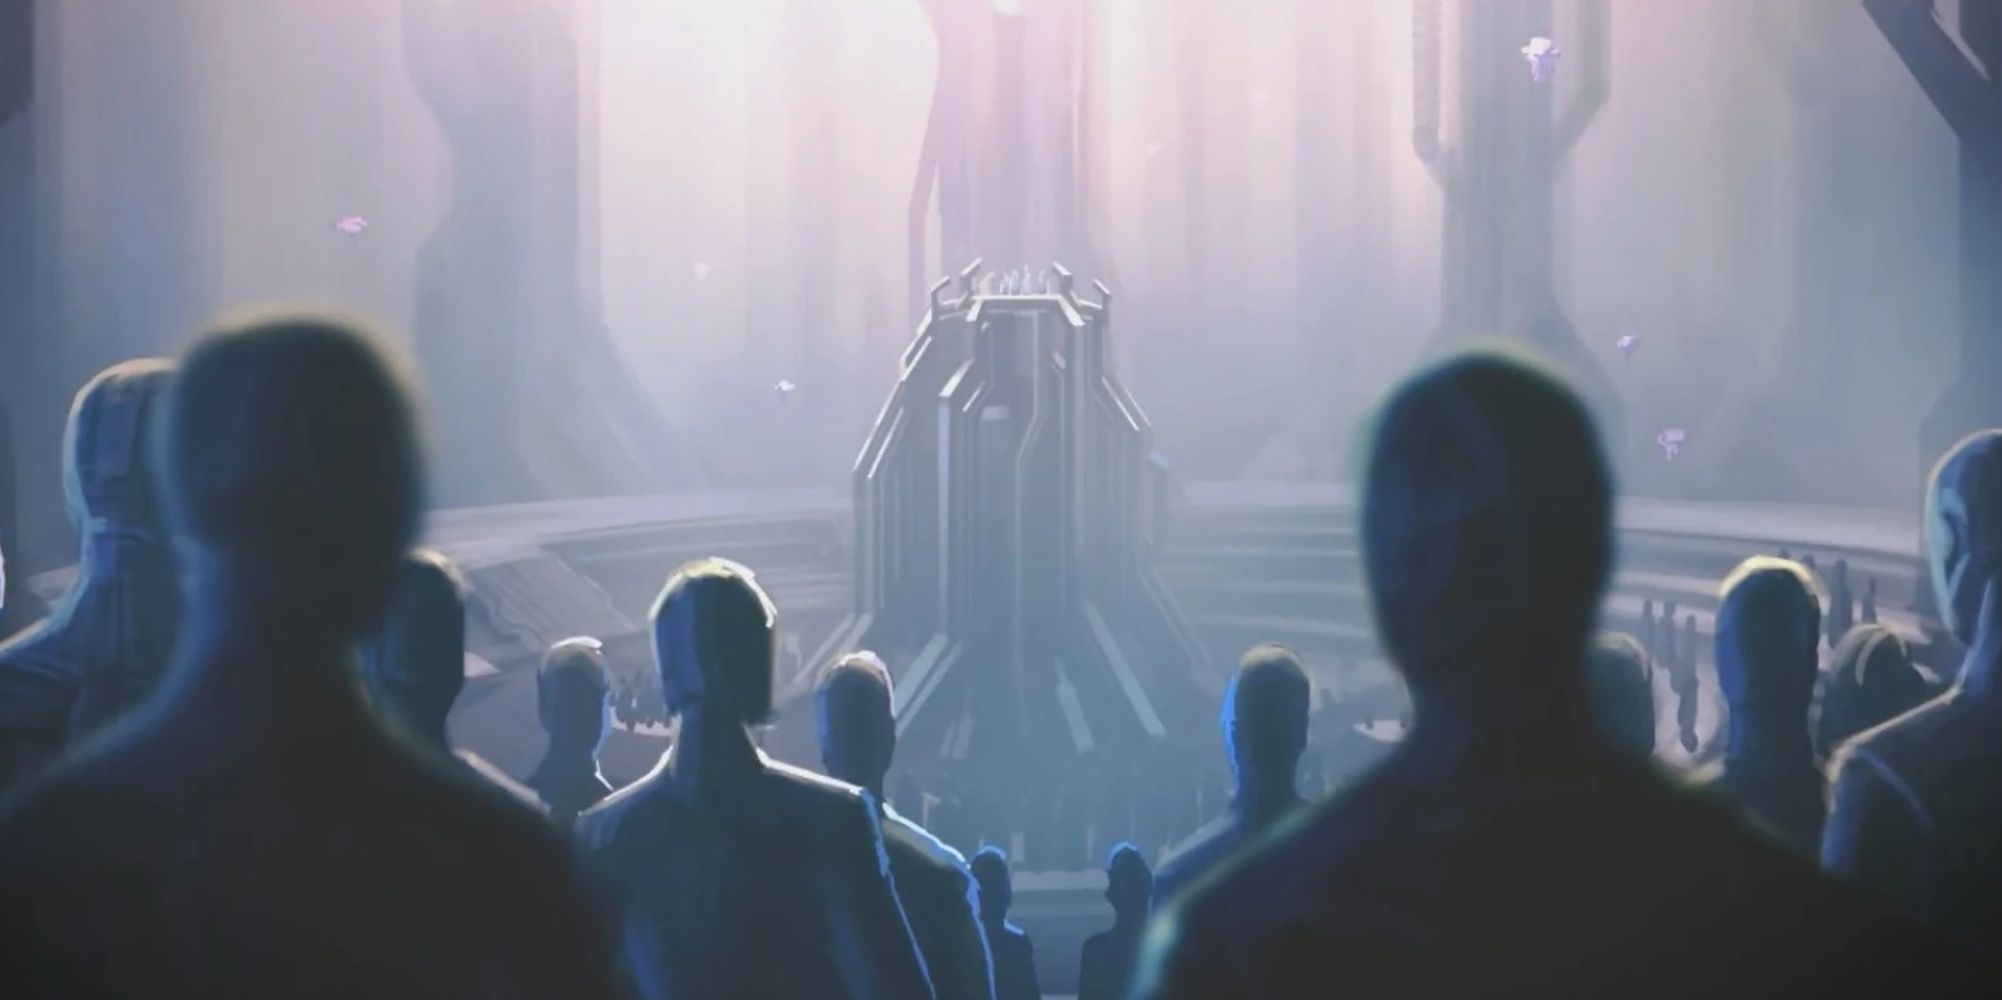 Halo: Forerunner Judicial Meeting In Halo Waypoint Logs